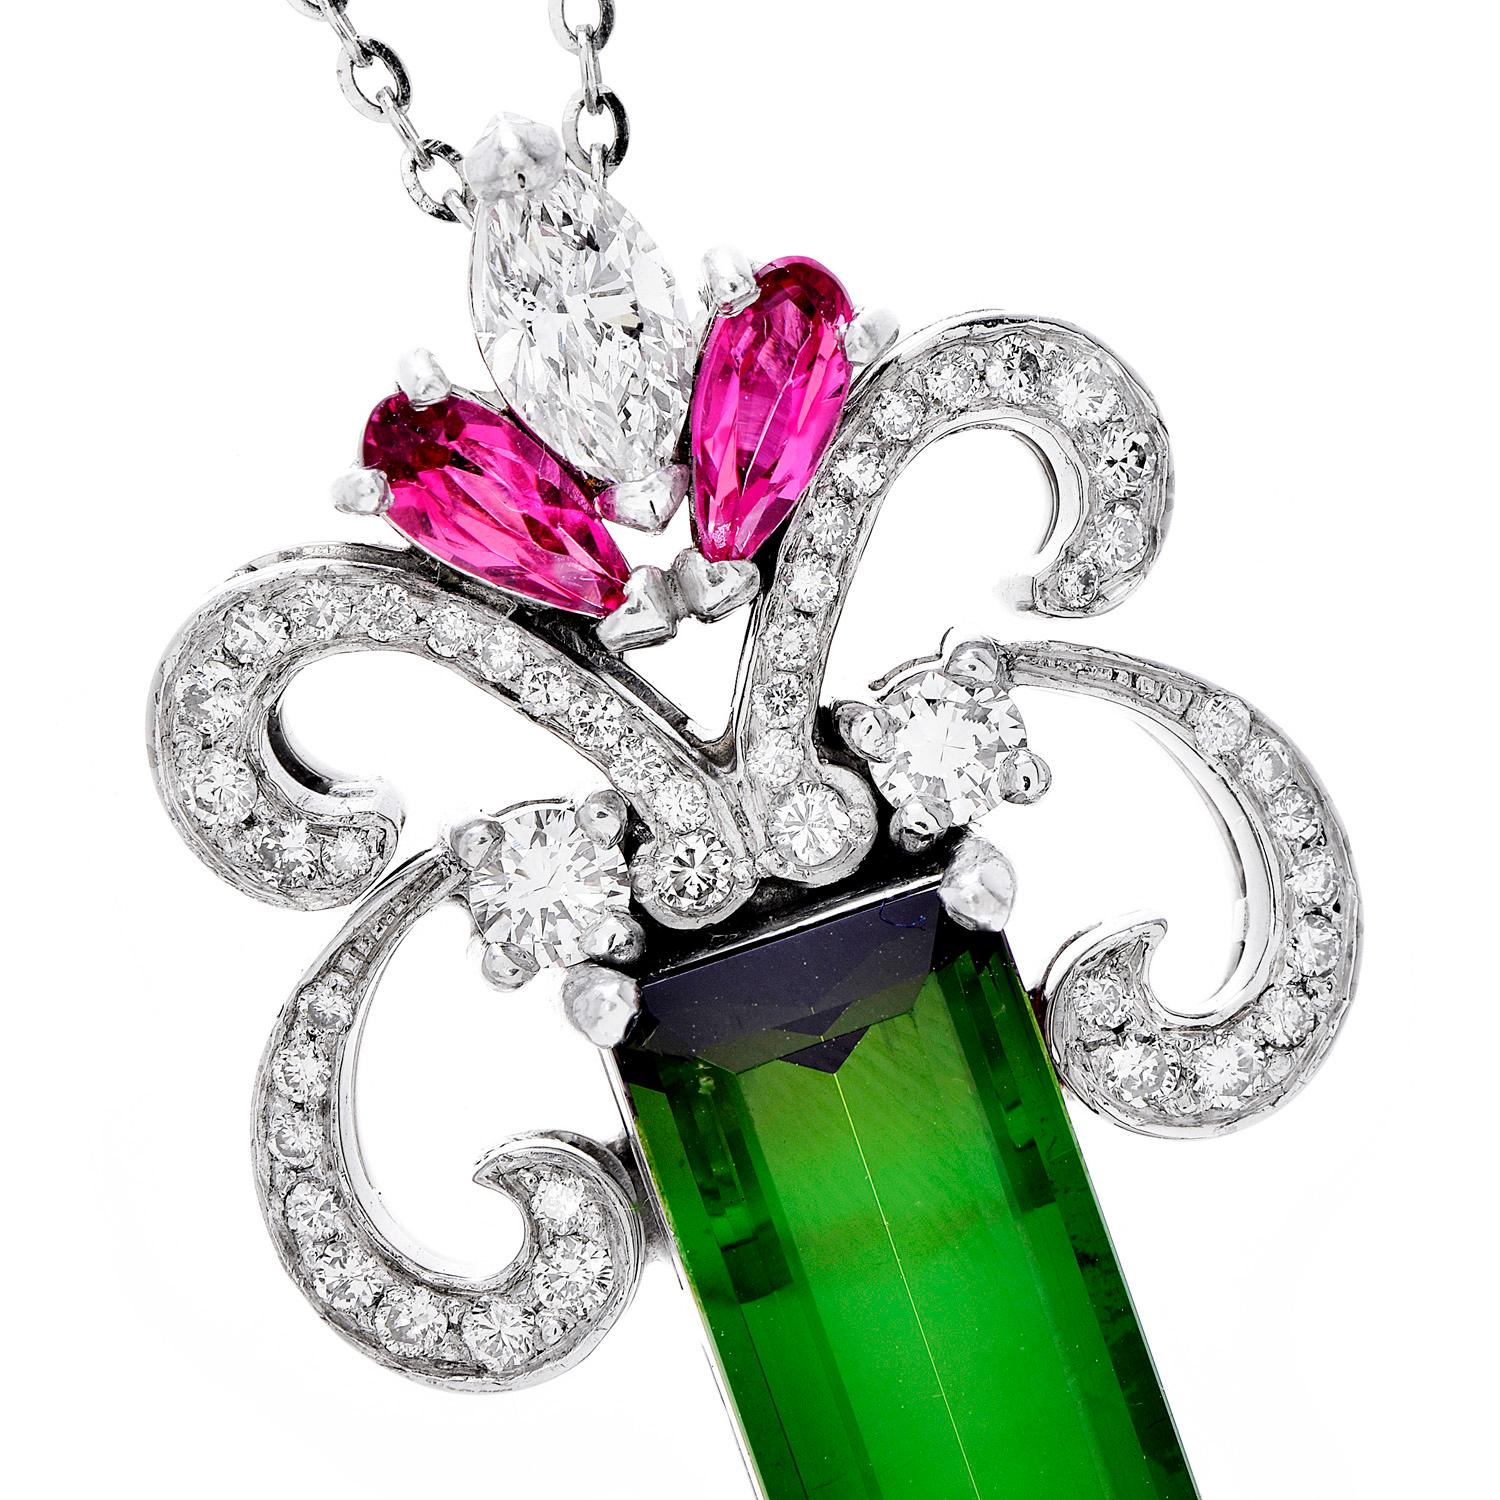 Fleur de Lis Inspired design, bar-style floral pendant,

Hand Crafted in solid 18K White gold by a master jeweler, with a center deep green color Tourmaline, rectangular cut, prong set, weighing approximately 7.80 carats, decorated from top to